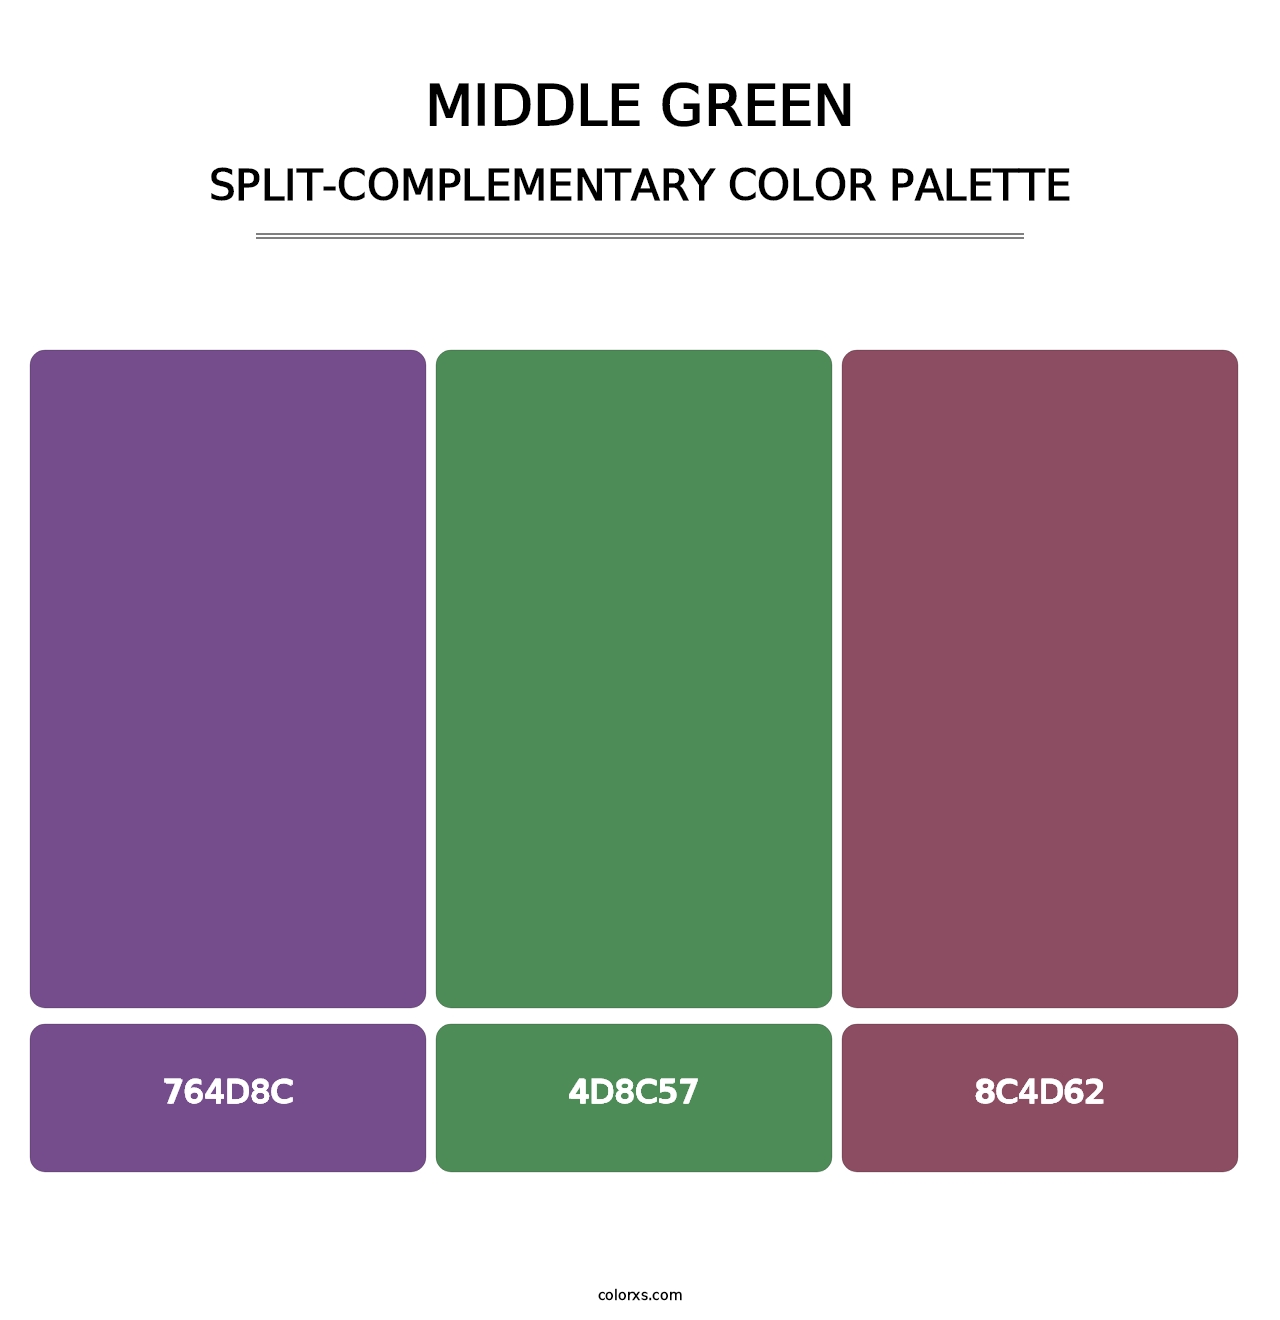 Middle Green - Split-Complementary Color Palette